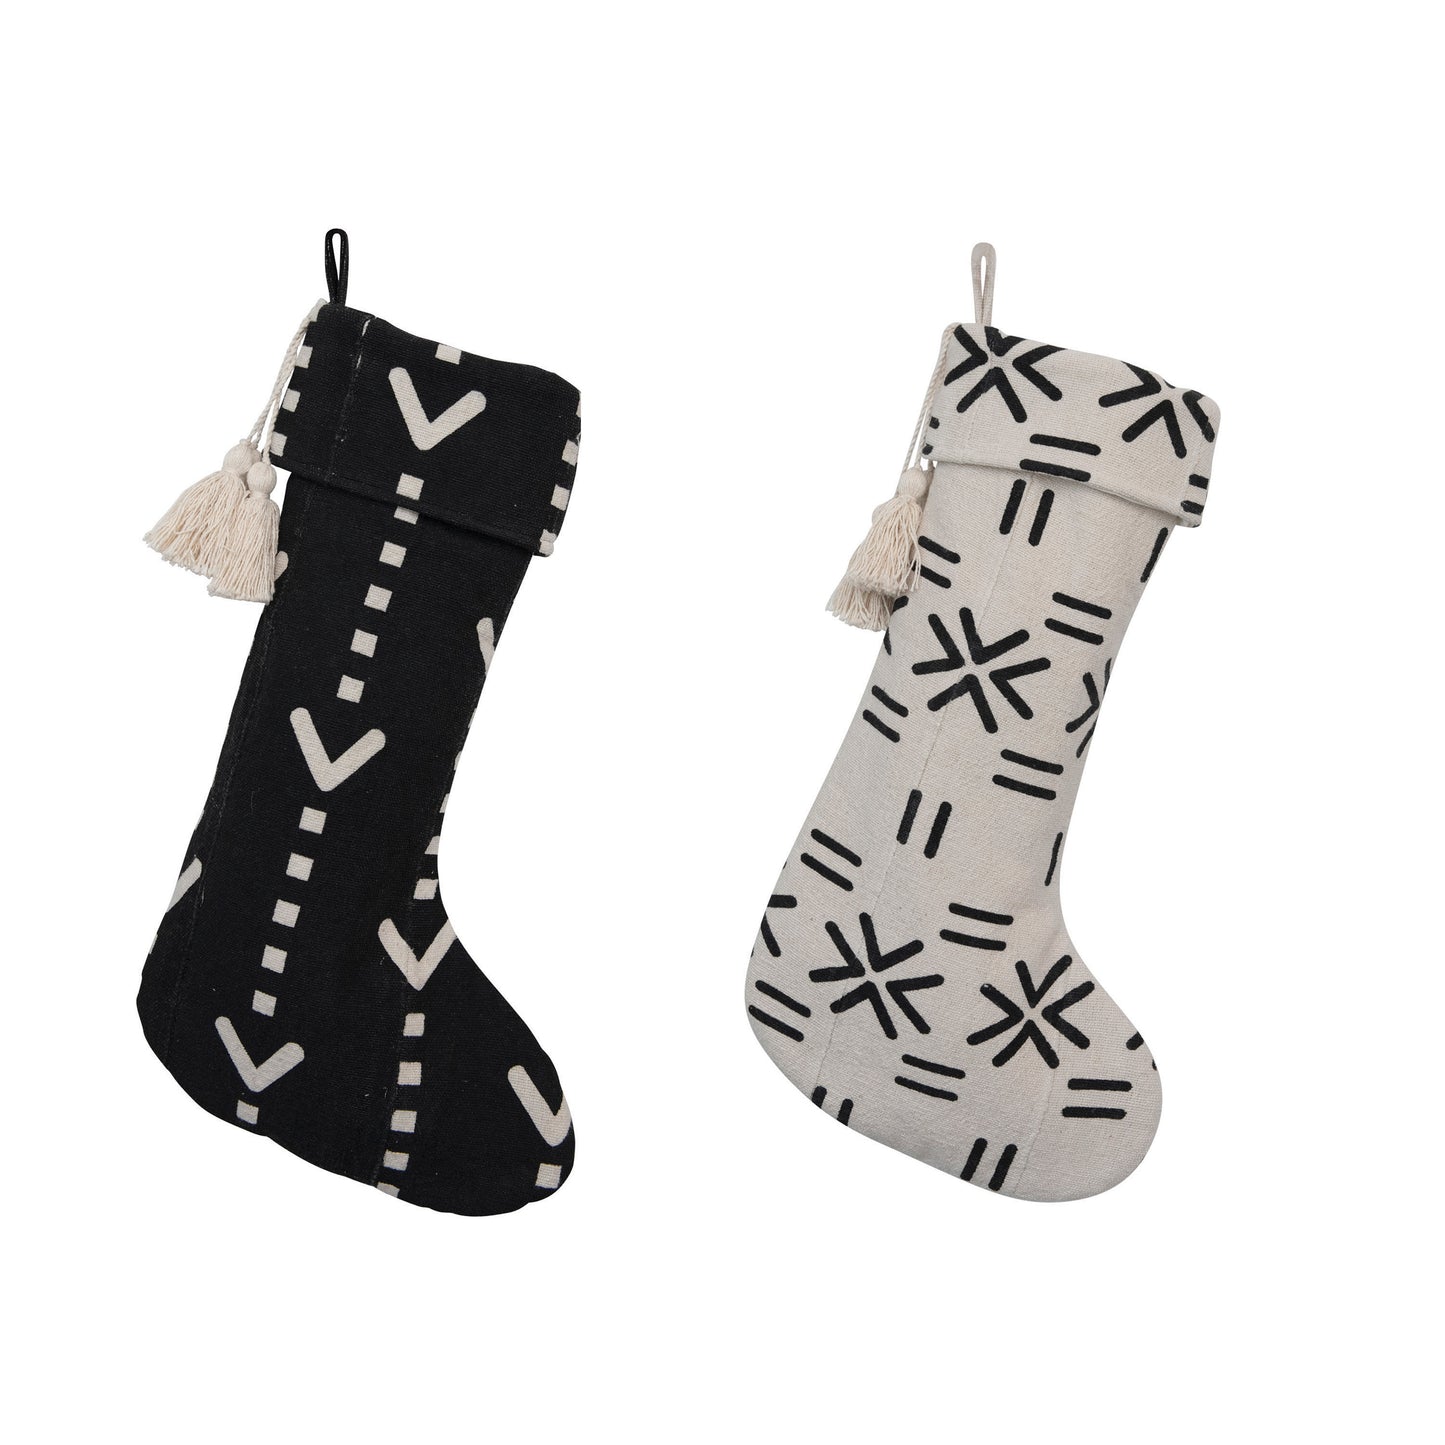 20"H Cotton Stocking with Mudcloth Pattern and Tassels, Black and White, 2 Styles